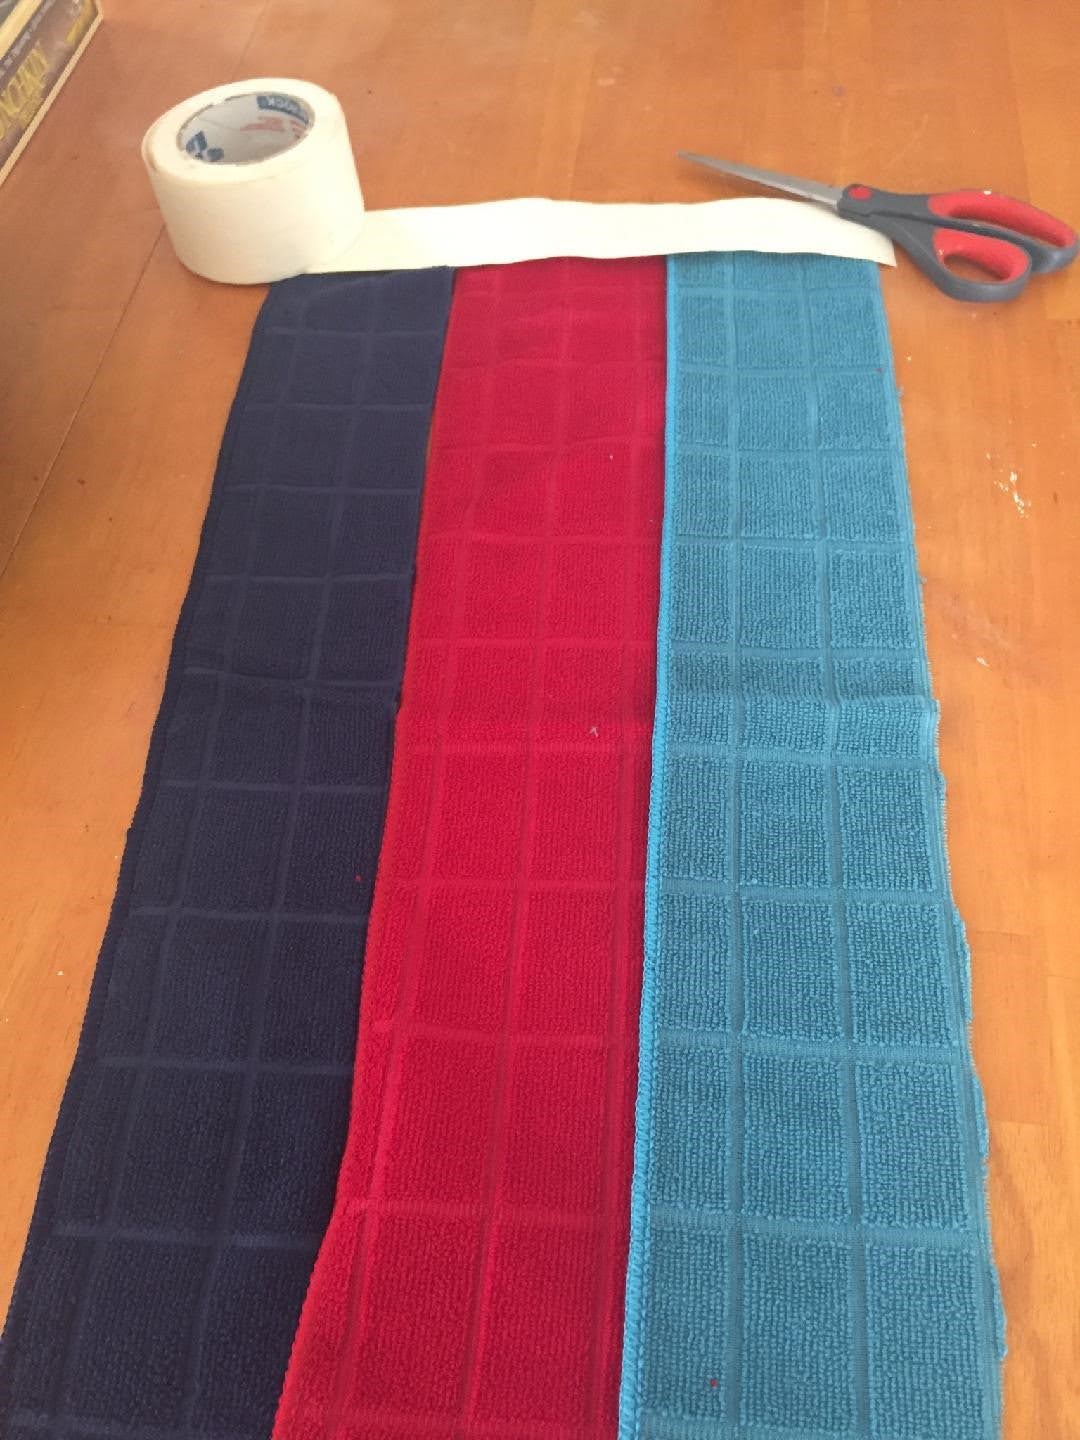 Three strips of towel laying side by side on table. Each is a different color.